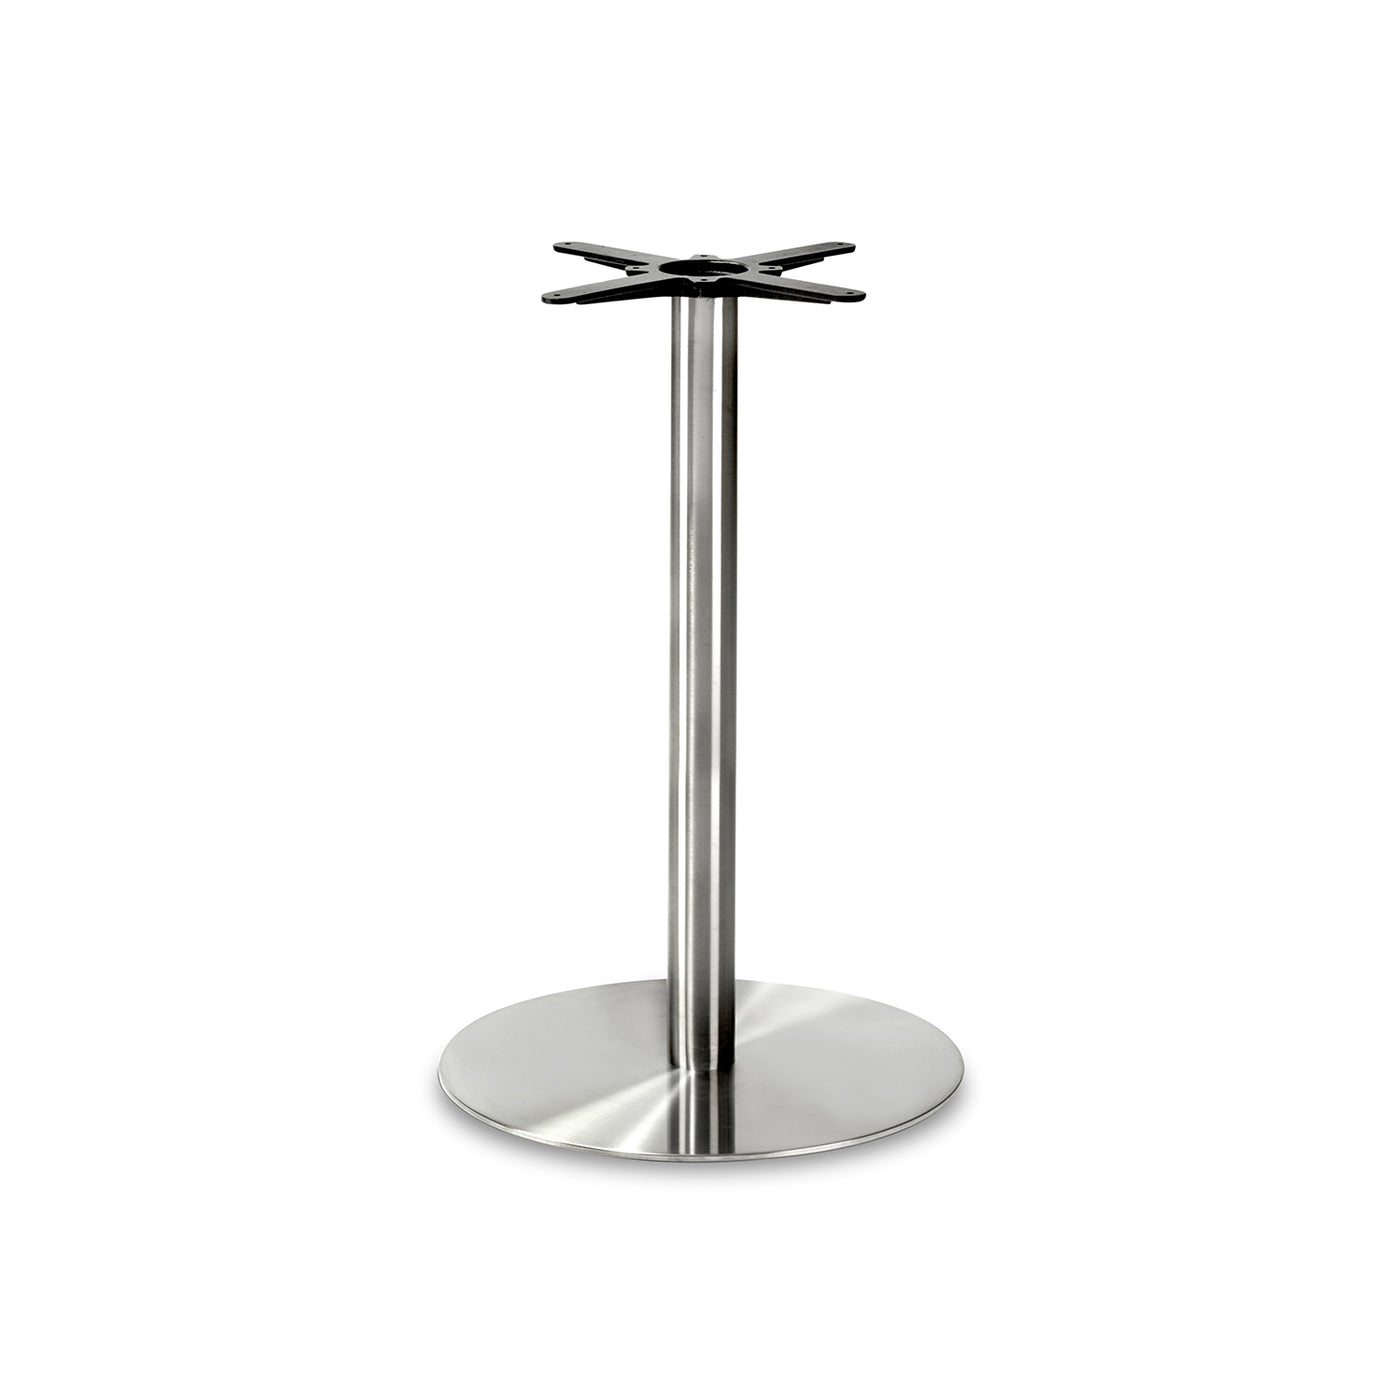 Noah Large Round Table Base - Stainless Steel